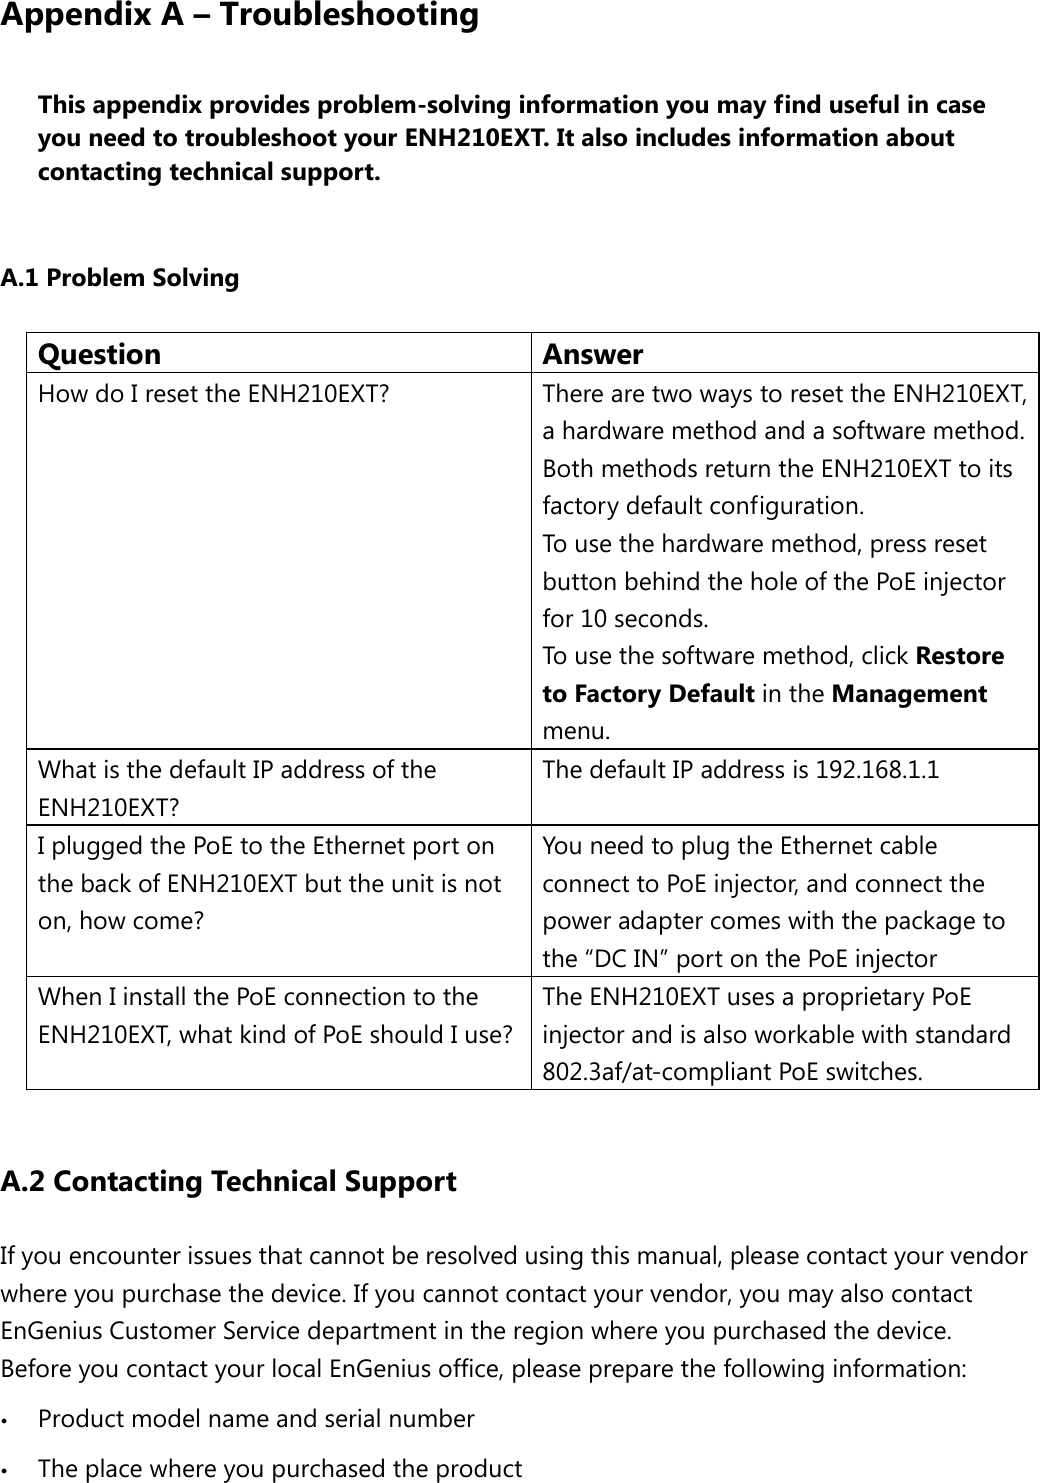 Appendix A – Troubleshooting This appendix provides problem-solving information you may find useful in case you need to troubleshoot your ENH210EXT. It also includes information about contacting technical support.  A.1 Problem Solving Question Answer How do I reset the ENH210EXT?  There are two ways to reset the ENH210EXT, a hardware method and a software method. Both methods return the ENH210EXT to its factory default configuration.   To use the hardware method, press reset button behind the hole of the PoE injector for 10 seconds. To use the software method, click Restore to Factory Default in the Management menu. What is the default IP address of the ENH210EXT? The default IP address is 192.168.1.1 I plugged the PoE to the Ethernet port on the back of ENH210EXT but the unit is not on, how come? You need to plug the Ethernet cable connect to PoE injector, and connect the power adapter comes with the package to the “DC IN” port on the PoE injector When I install the PoE connection to the ENH210EXT, what kind of PoE should I use? The ENH210EXT uses a proprietary PoE injector and is also workable with standard 802.3af/at-compliant PoE switches.  A.2 Contacting Technical Support If you encounter issues that cannot be resolved using this manual, please contact your vendor where you purchase the device. If you cannot contact your vendor, you may also contact EnGenius Customer Service department in the region where you purchased the device.   Before you contact your local EnGenius office, please prepare the following information:  Product model name and serial number  The place where you purchased the product 